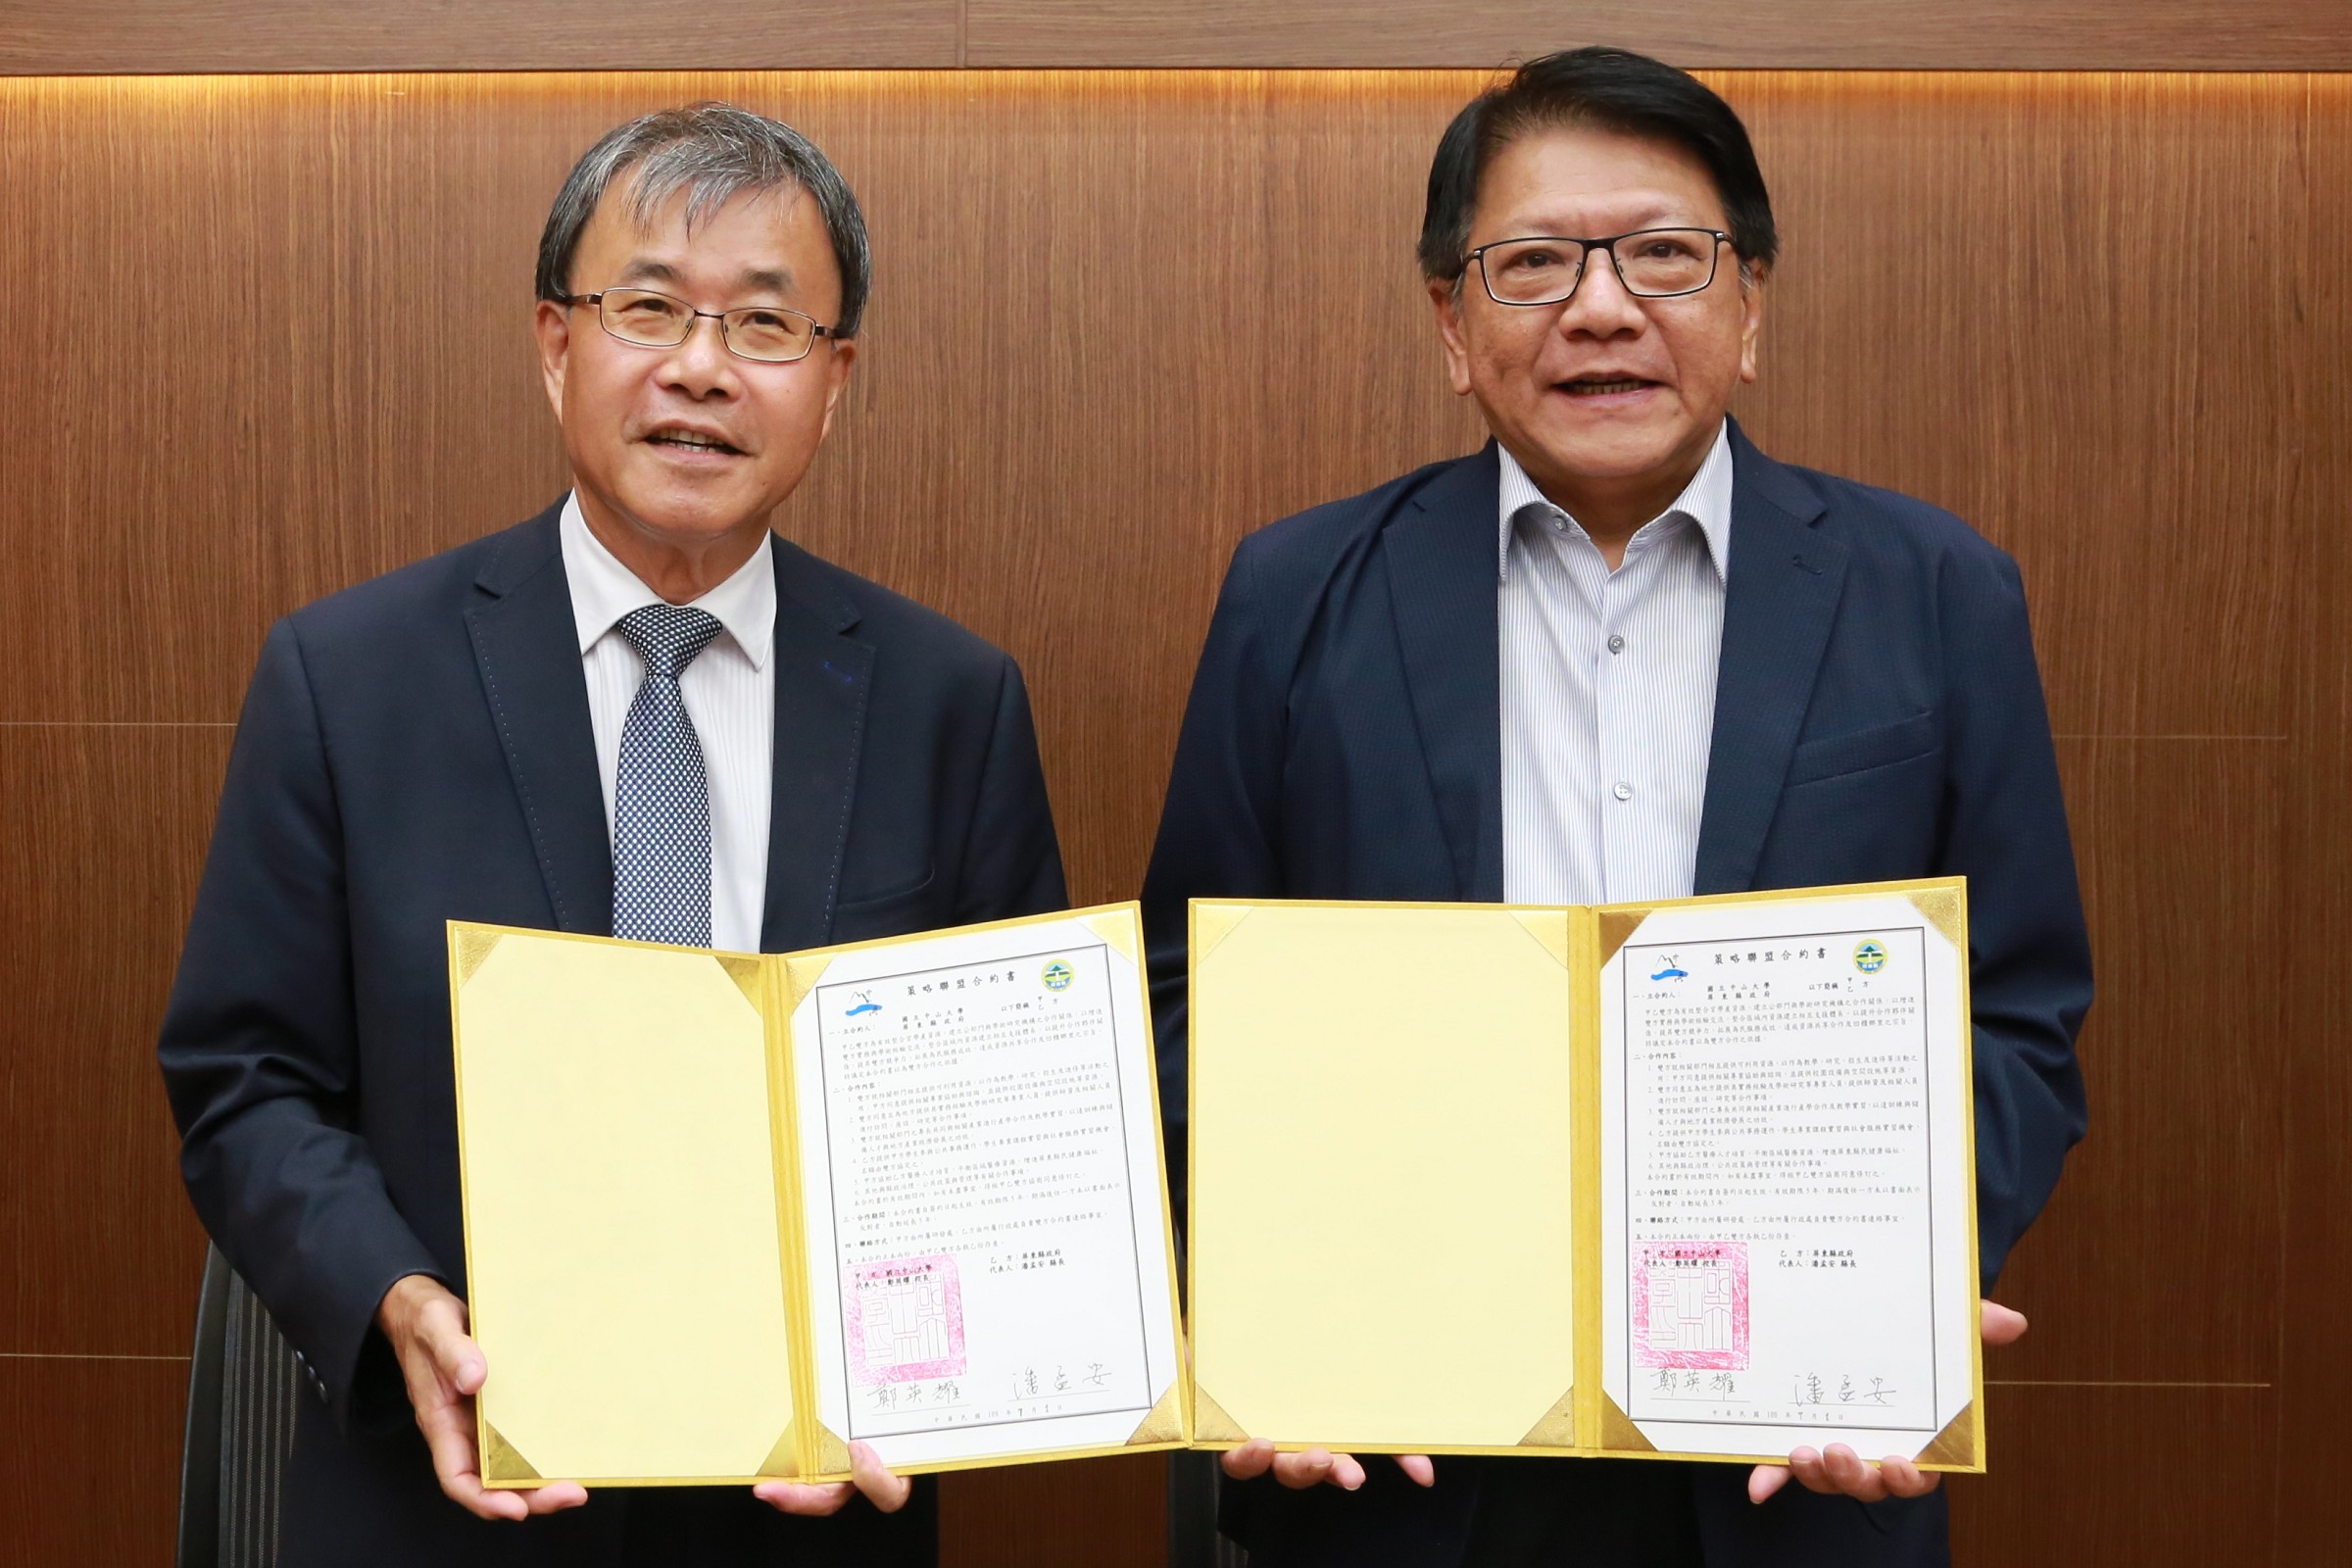 NSYSU signs MOU with Pingtung County Mayor Men-An Pan to improve the availability of medical services in rural areas